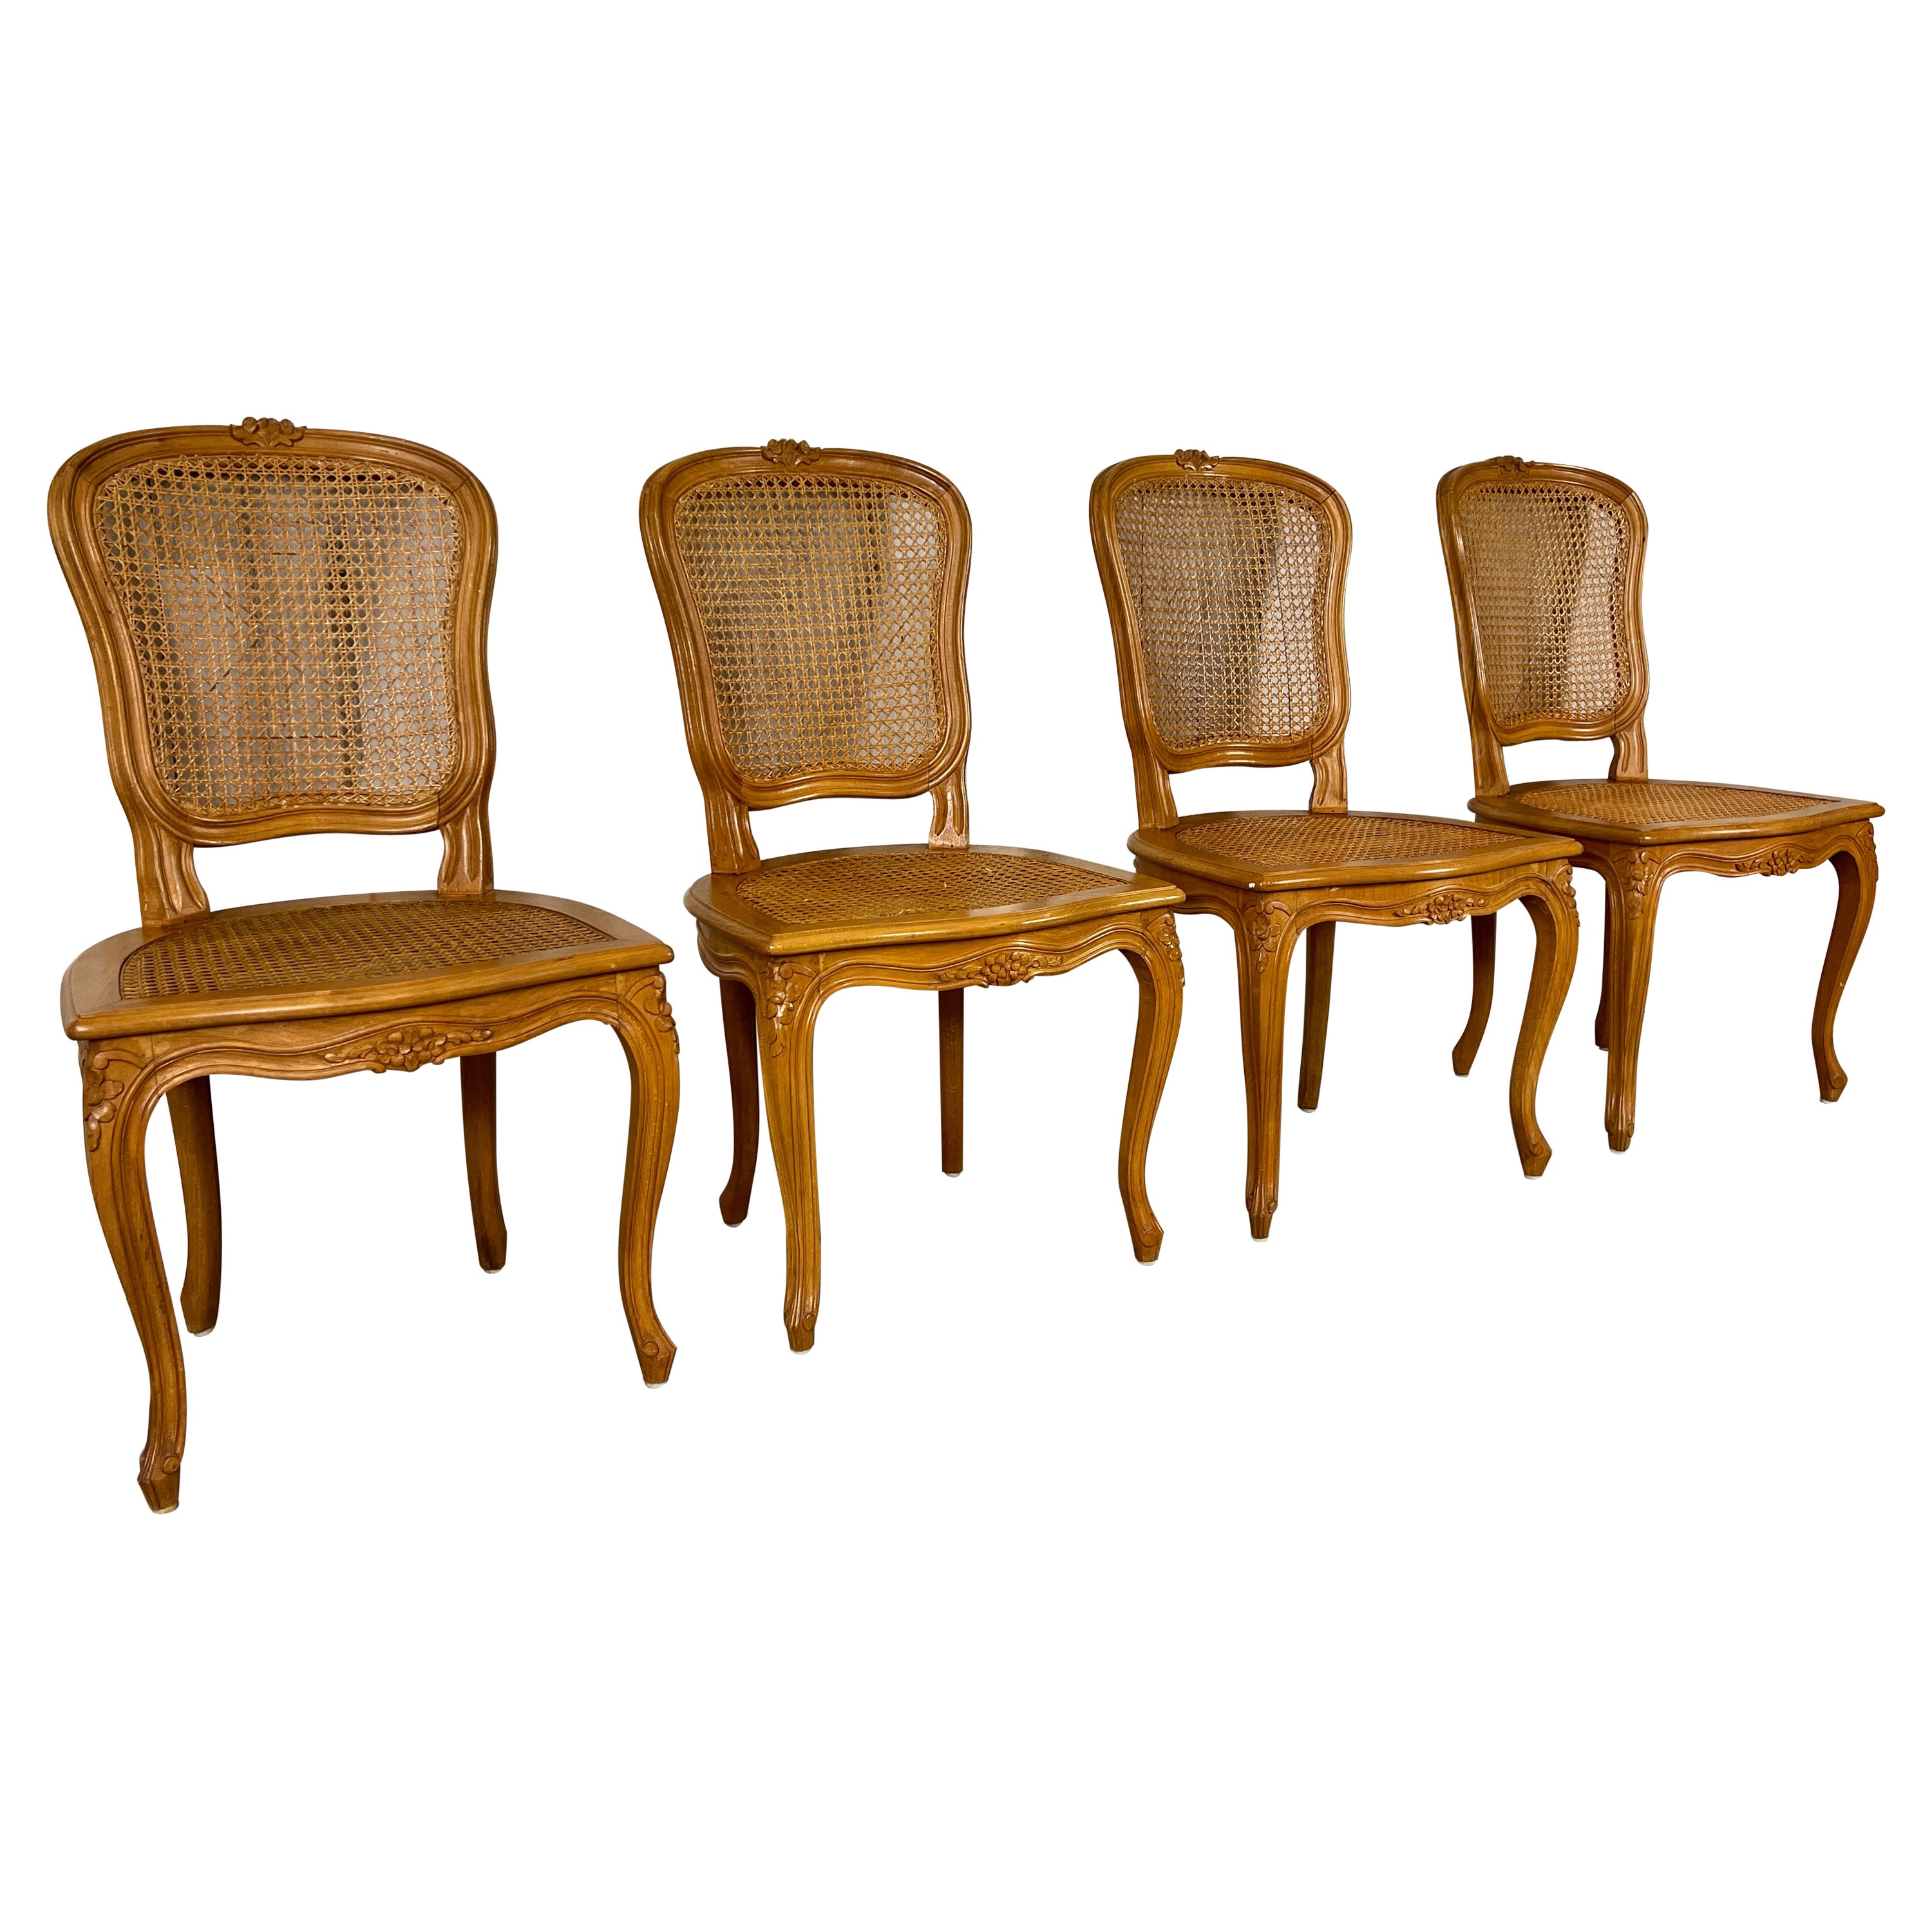 Vintage French Curved Back Cane Chairs